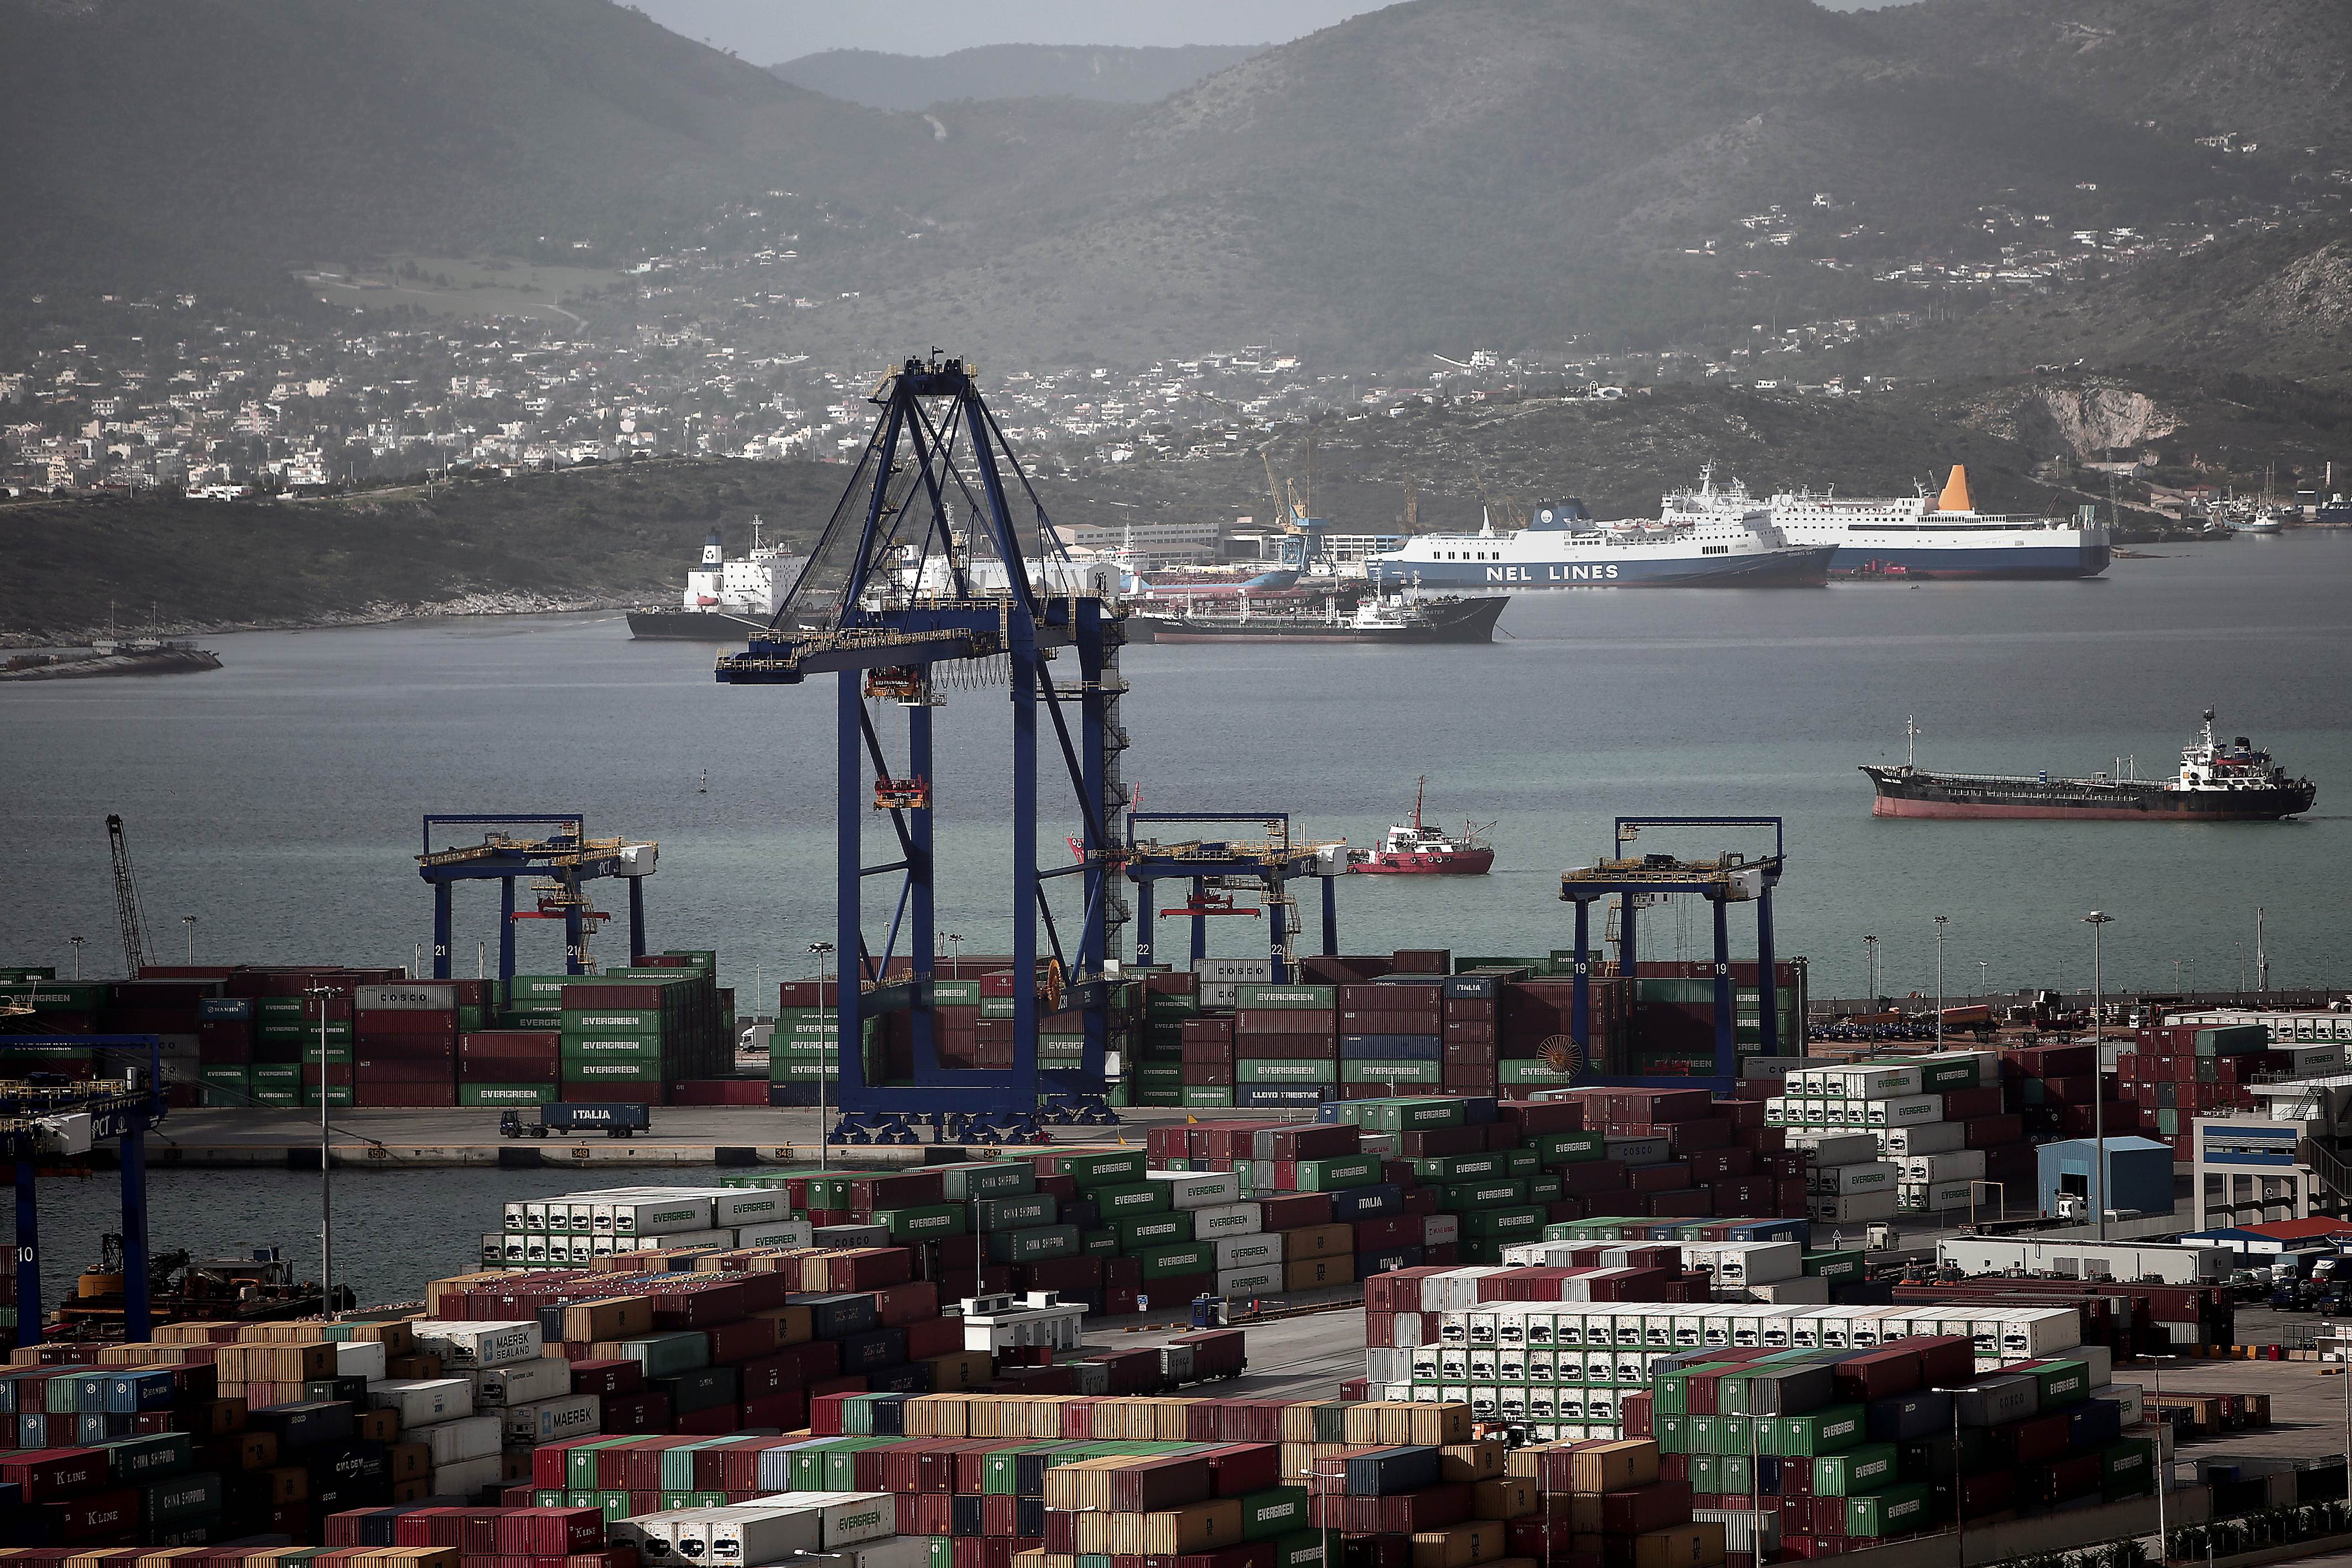 A picture taken on January 31, 2015 shows Greece's largest port in Piraeus, near Athens. Greece's new left-wing government will halt the privatisation of the country's biggest port Piraeus, which China's COSCO group has bid for, an official in charge of the process said on January 28, 2014. AFP PHOTO / ANGELOS TZORTZINIS